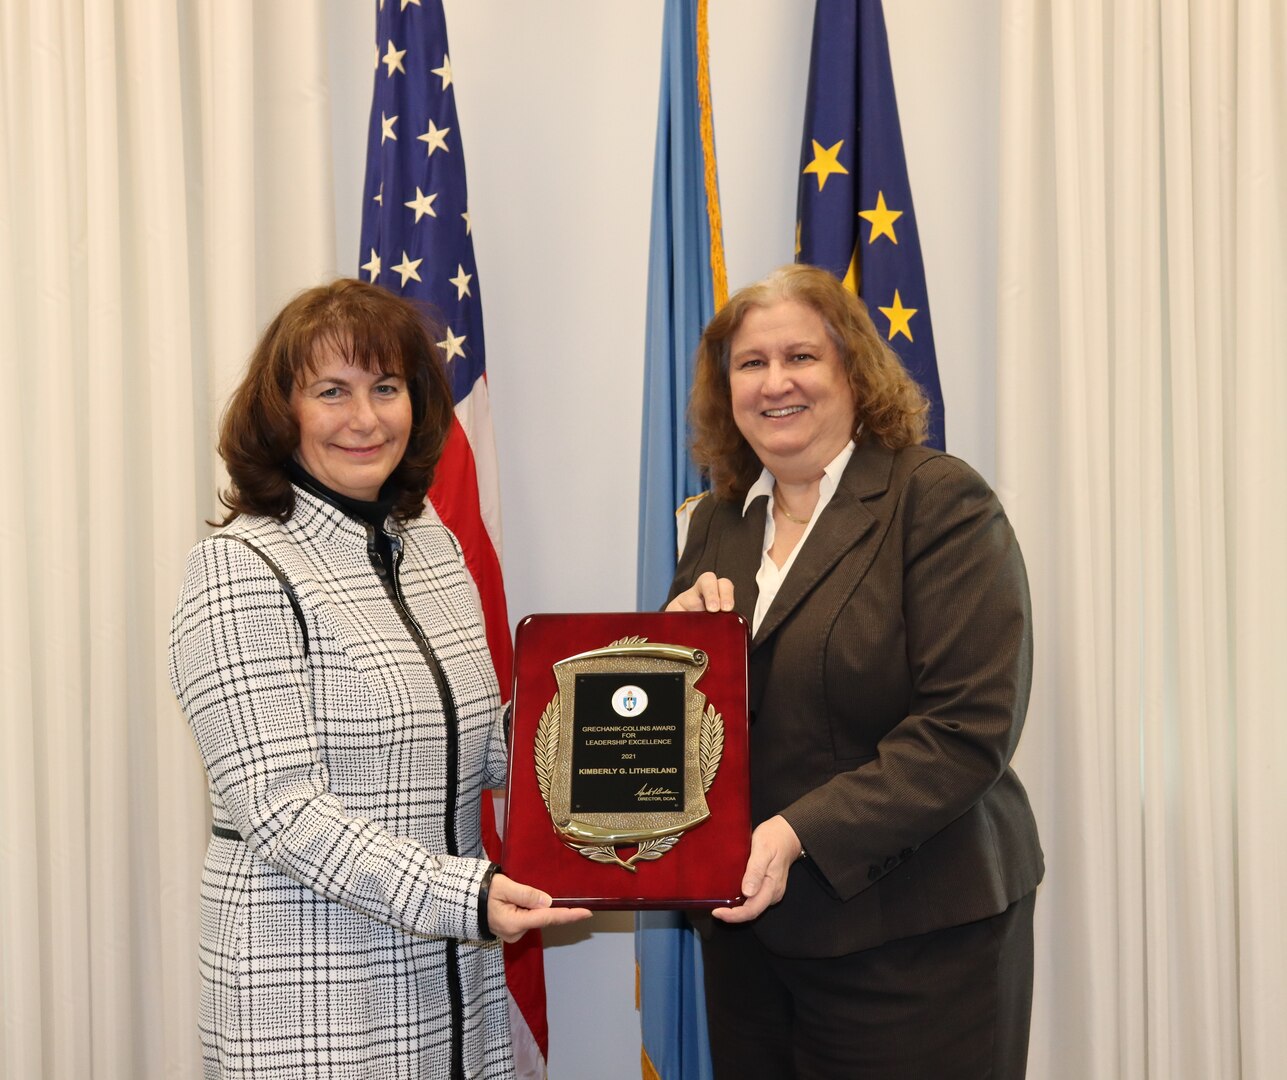 two women standing with an award and flags in the background